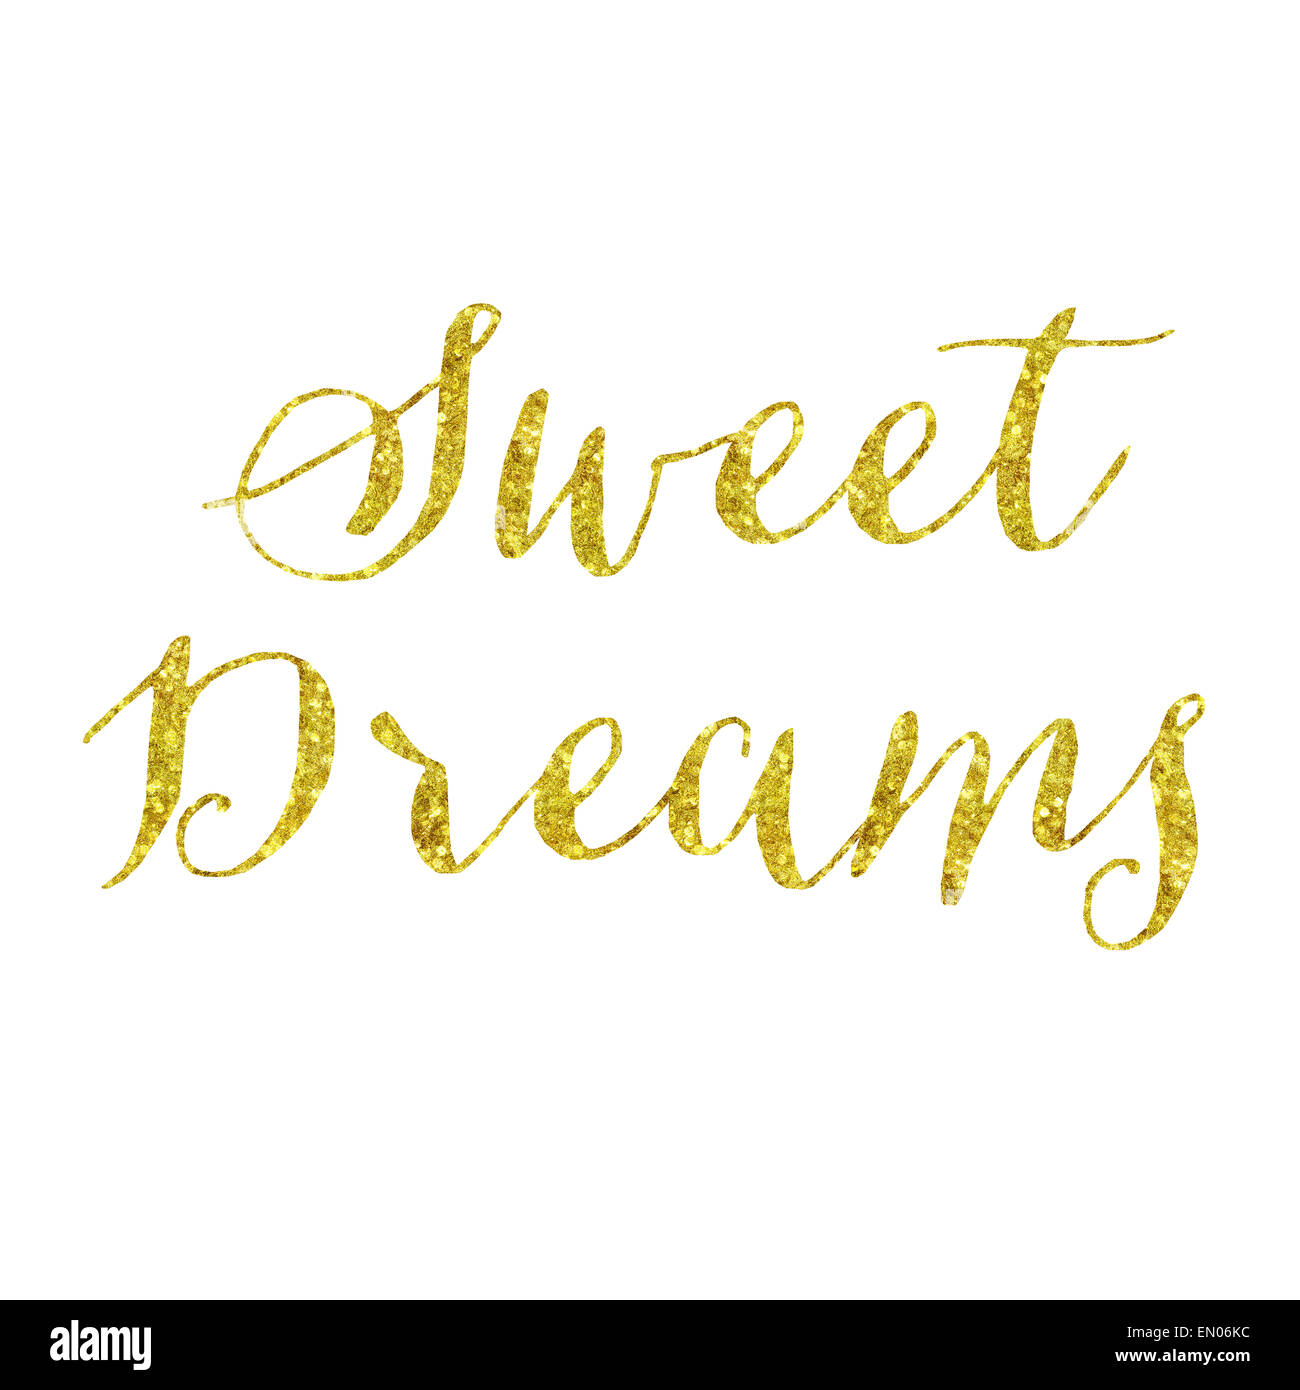 Sweet Dreams Glittery Gold Faux Foil Metallic Inspirational Quote Isolated on White Background Stock Photo